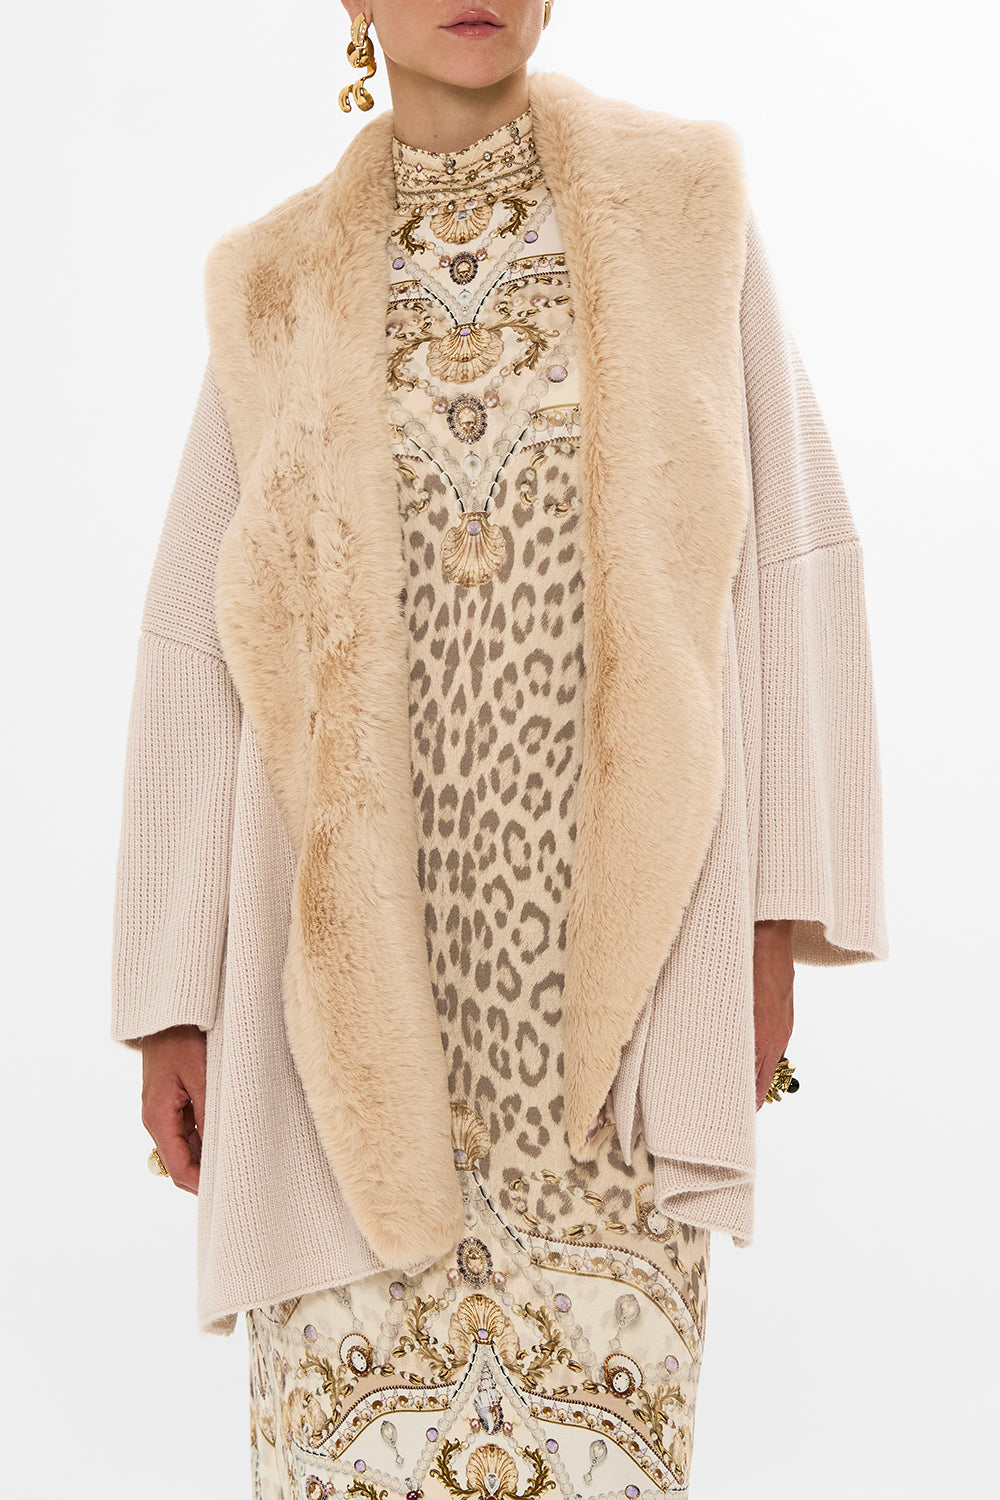 CAMILLA blush knit relaxed layer with faux fur in Grotto Goddess print.